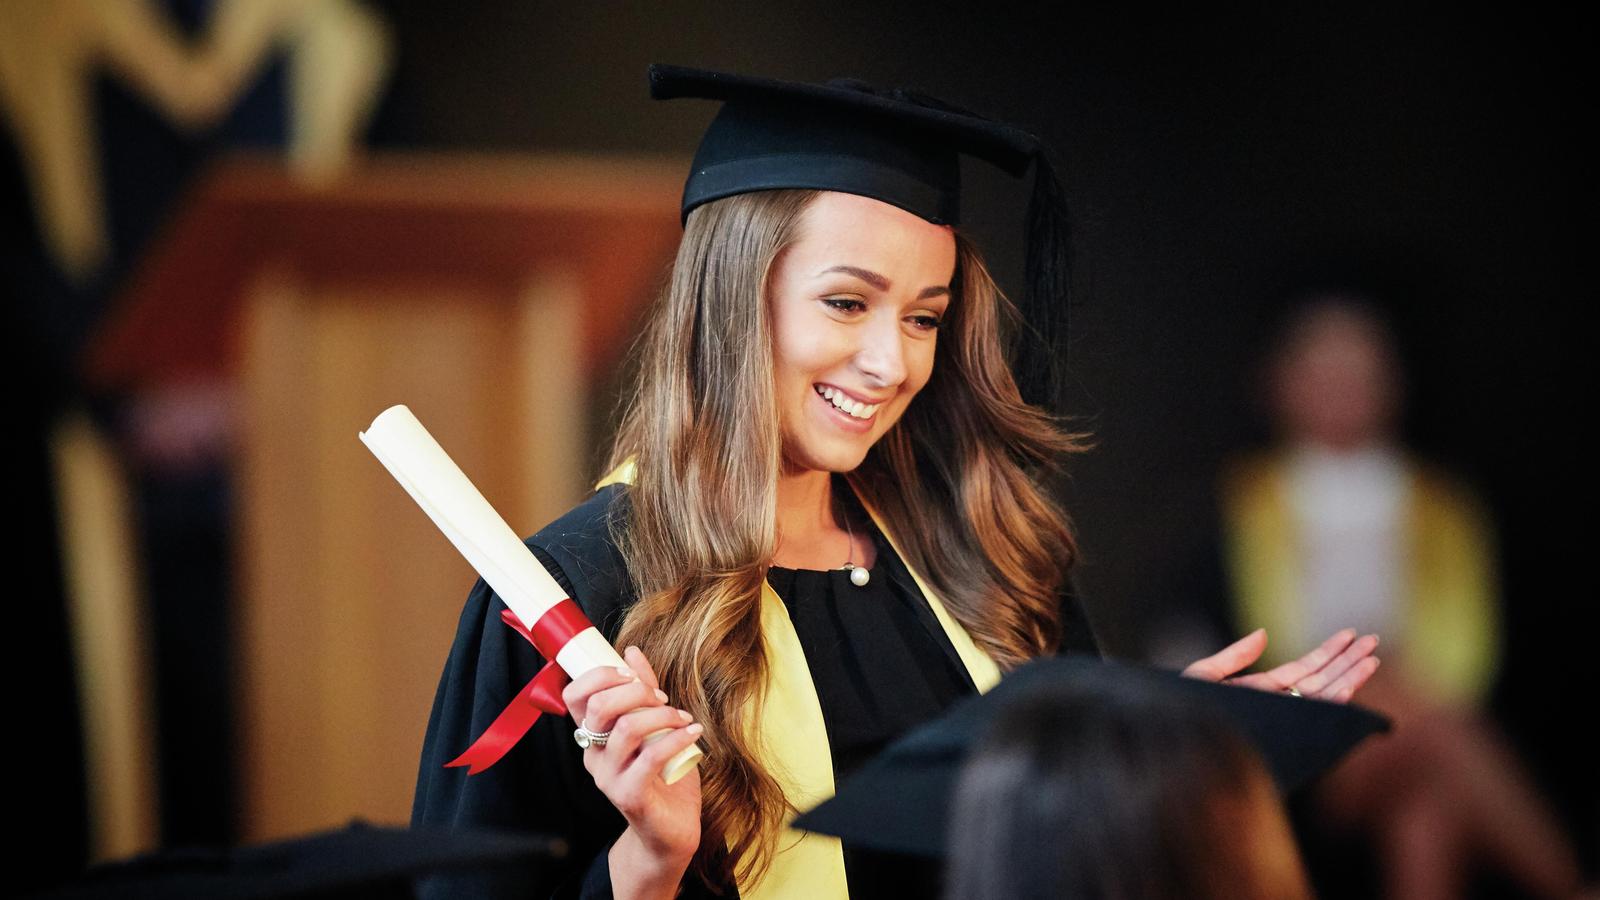 A woman wearing a mortarboard and gown holds a diploma